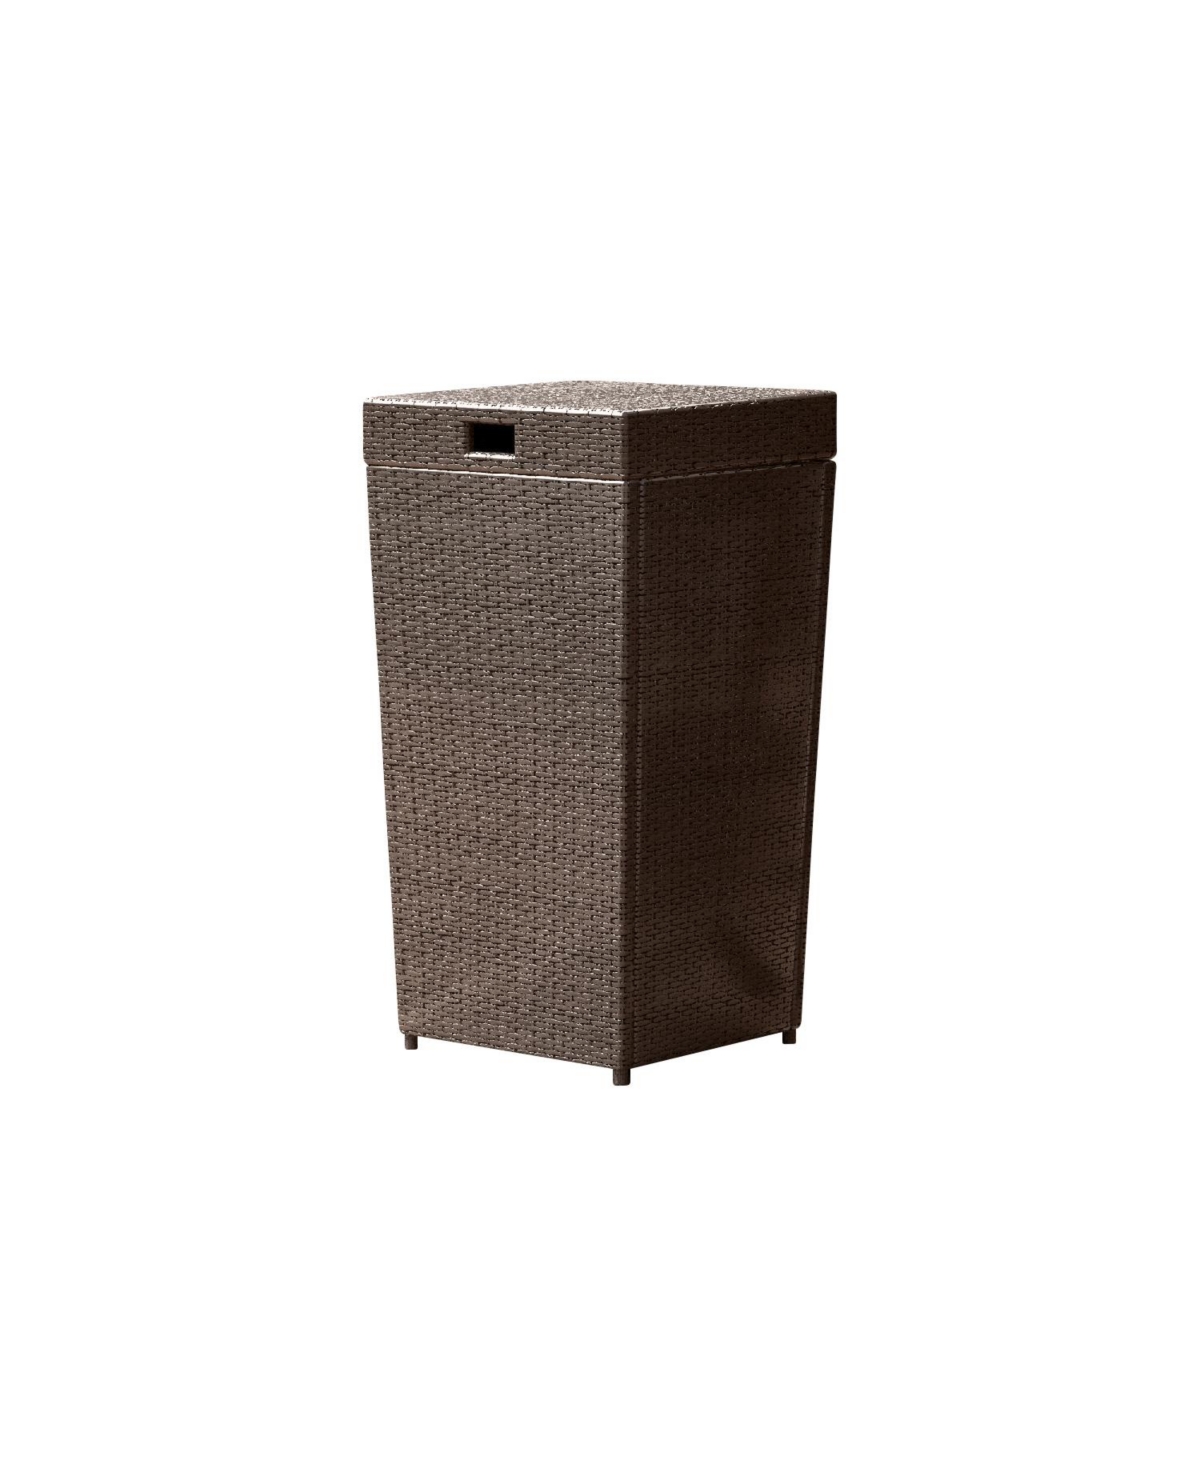 Outdoor Durable Wicker Trash Can with Lid - 30 Gallon - Brown